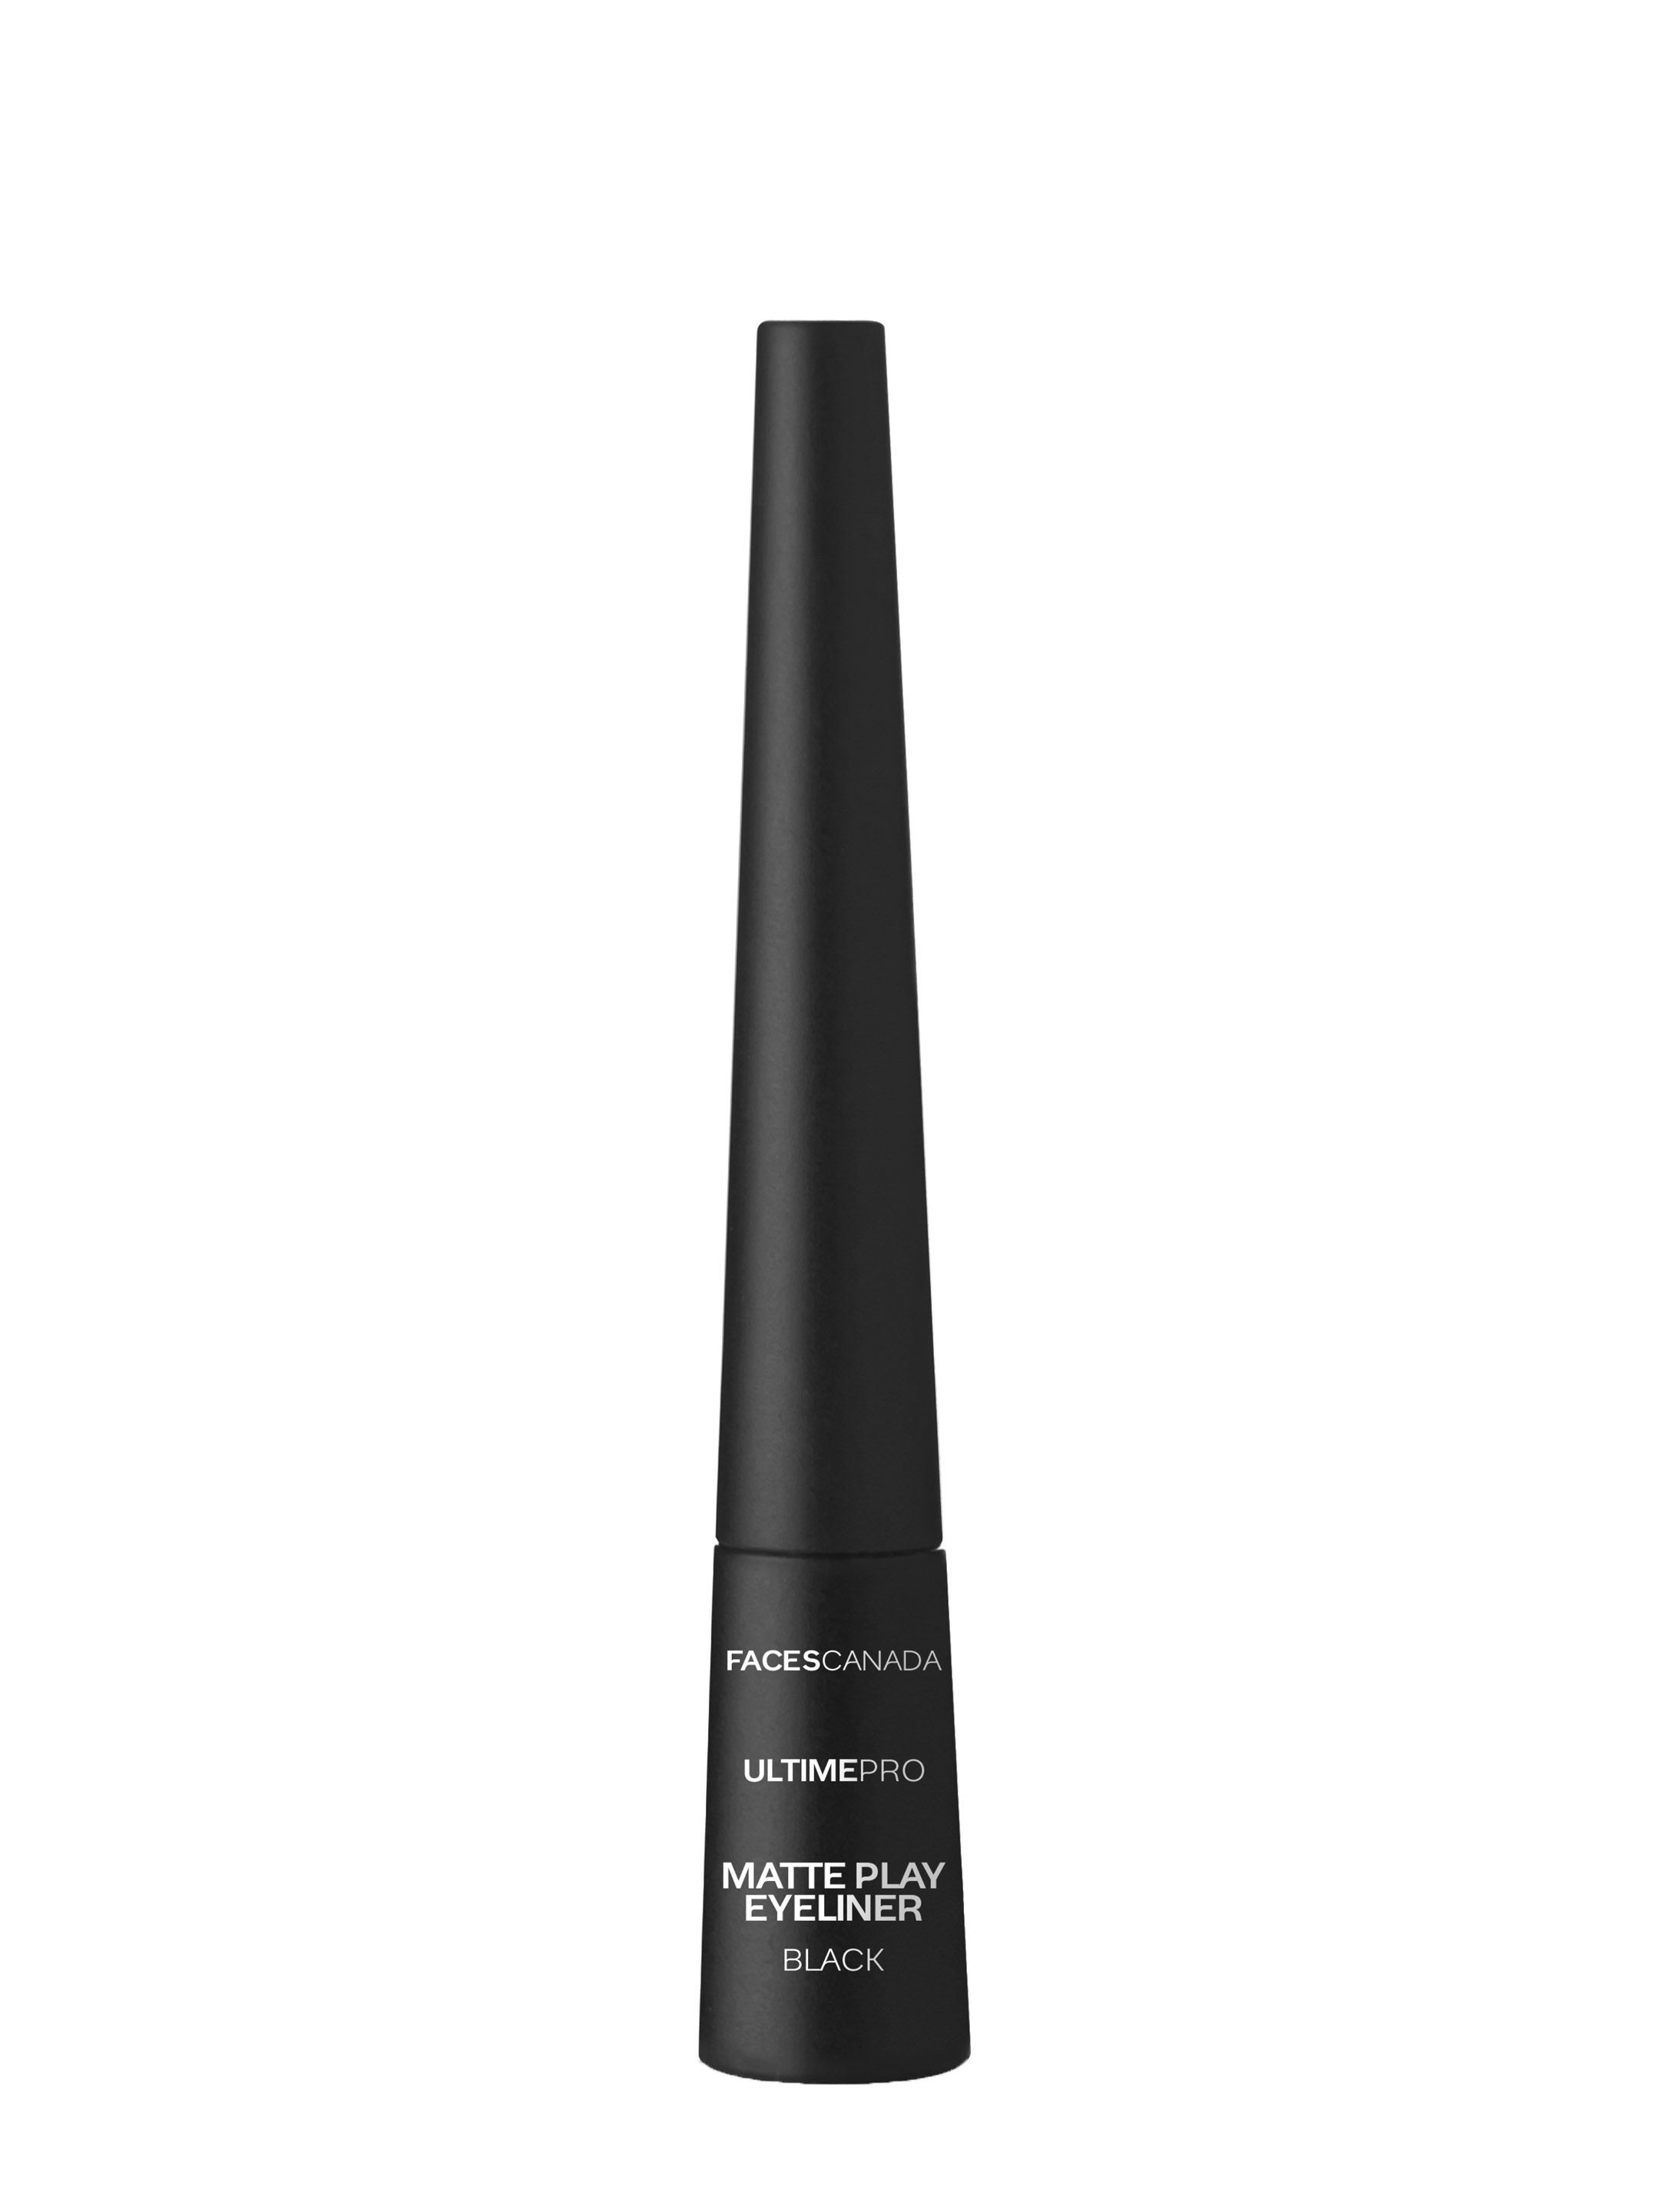 FACES CANADA Ultime Pro Matte Play Eyeliner - Black 2.5 ml Price in India